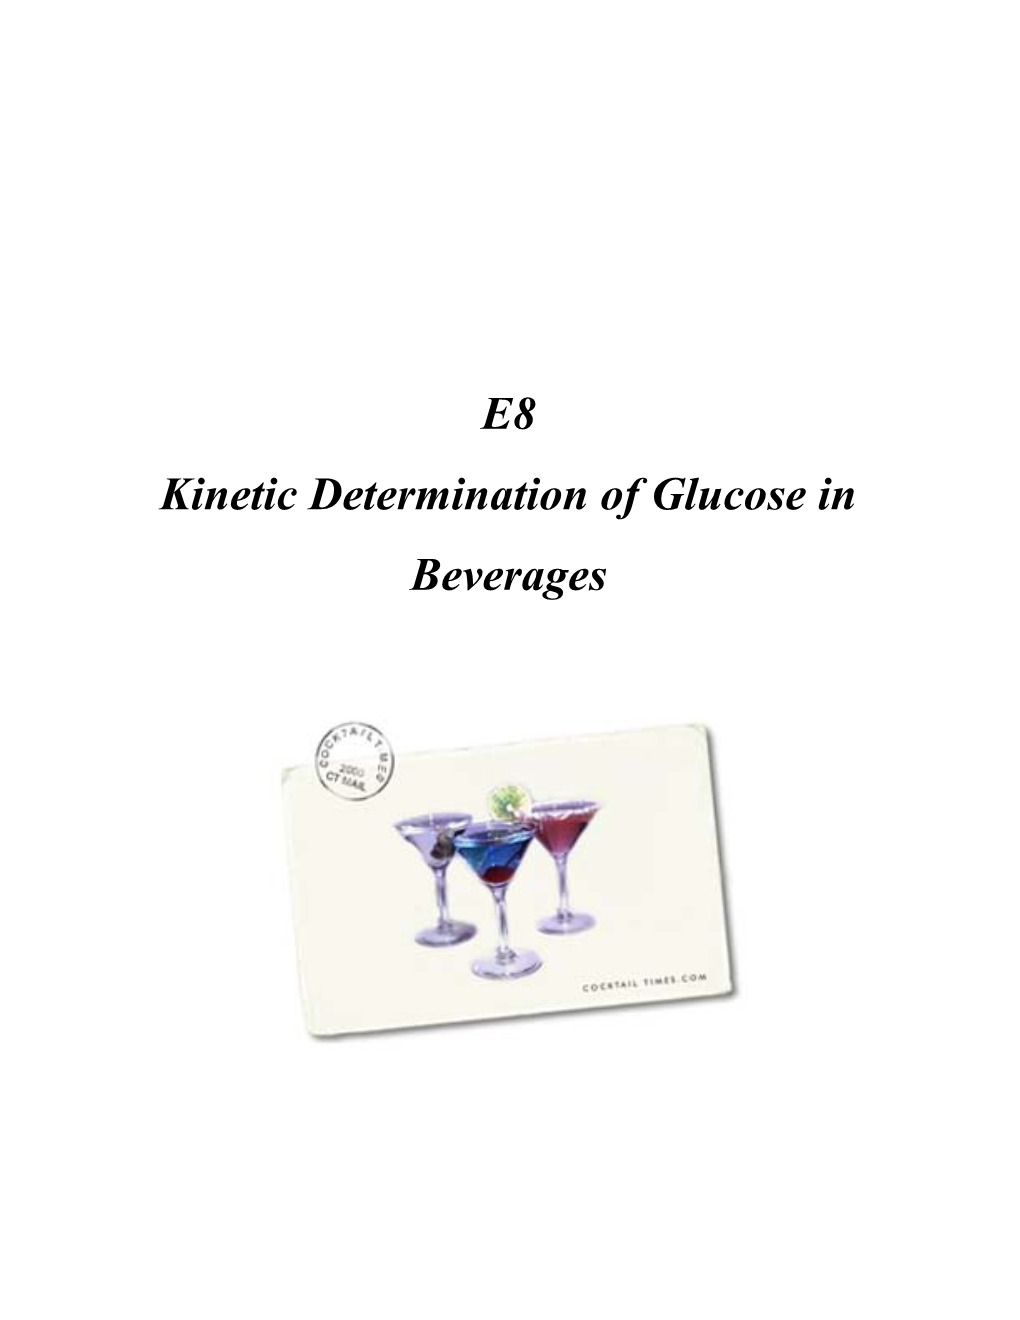 Kinetic Determination of Glucose in Beverages